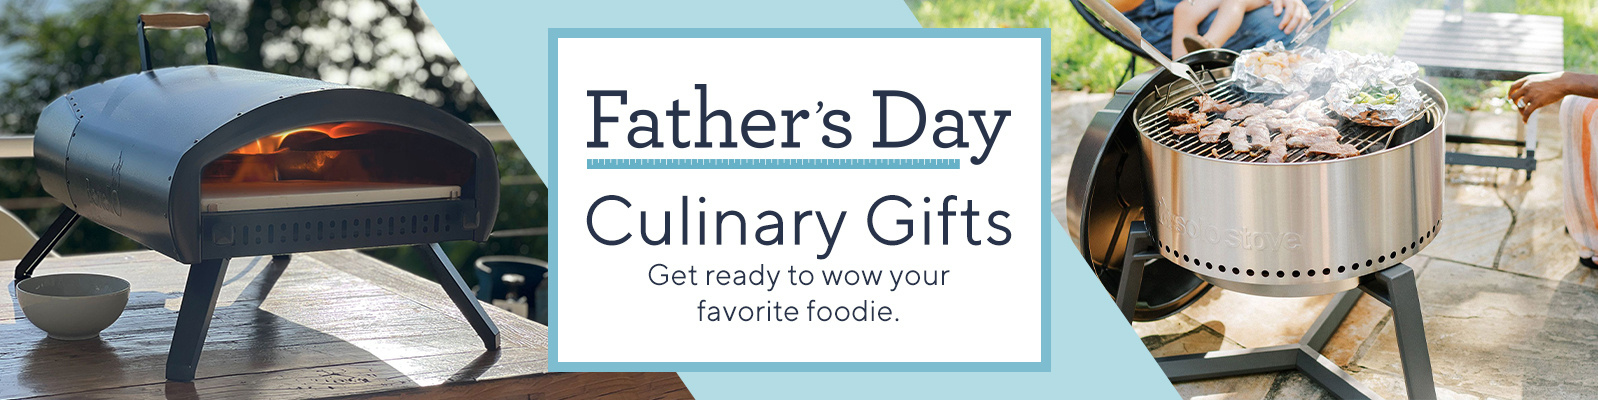 Father's Day Culinary Gifts: Get ready to wow your favorite foodie. 